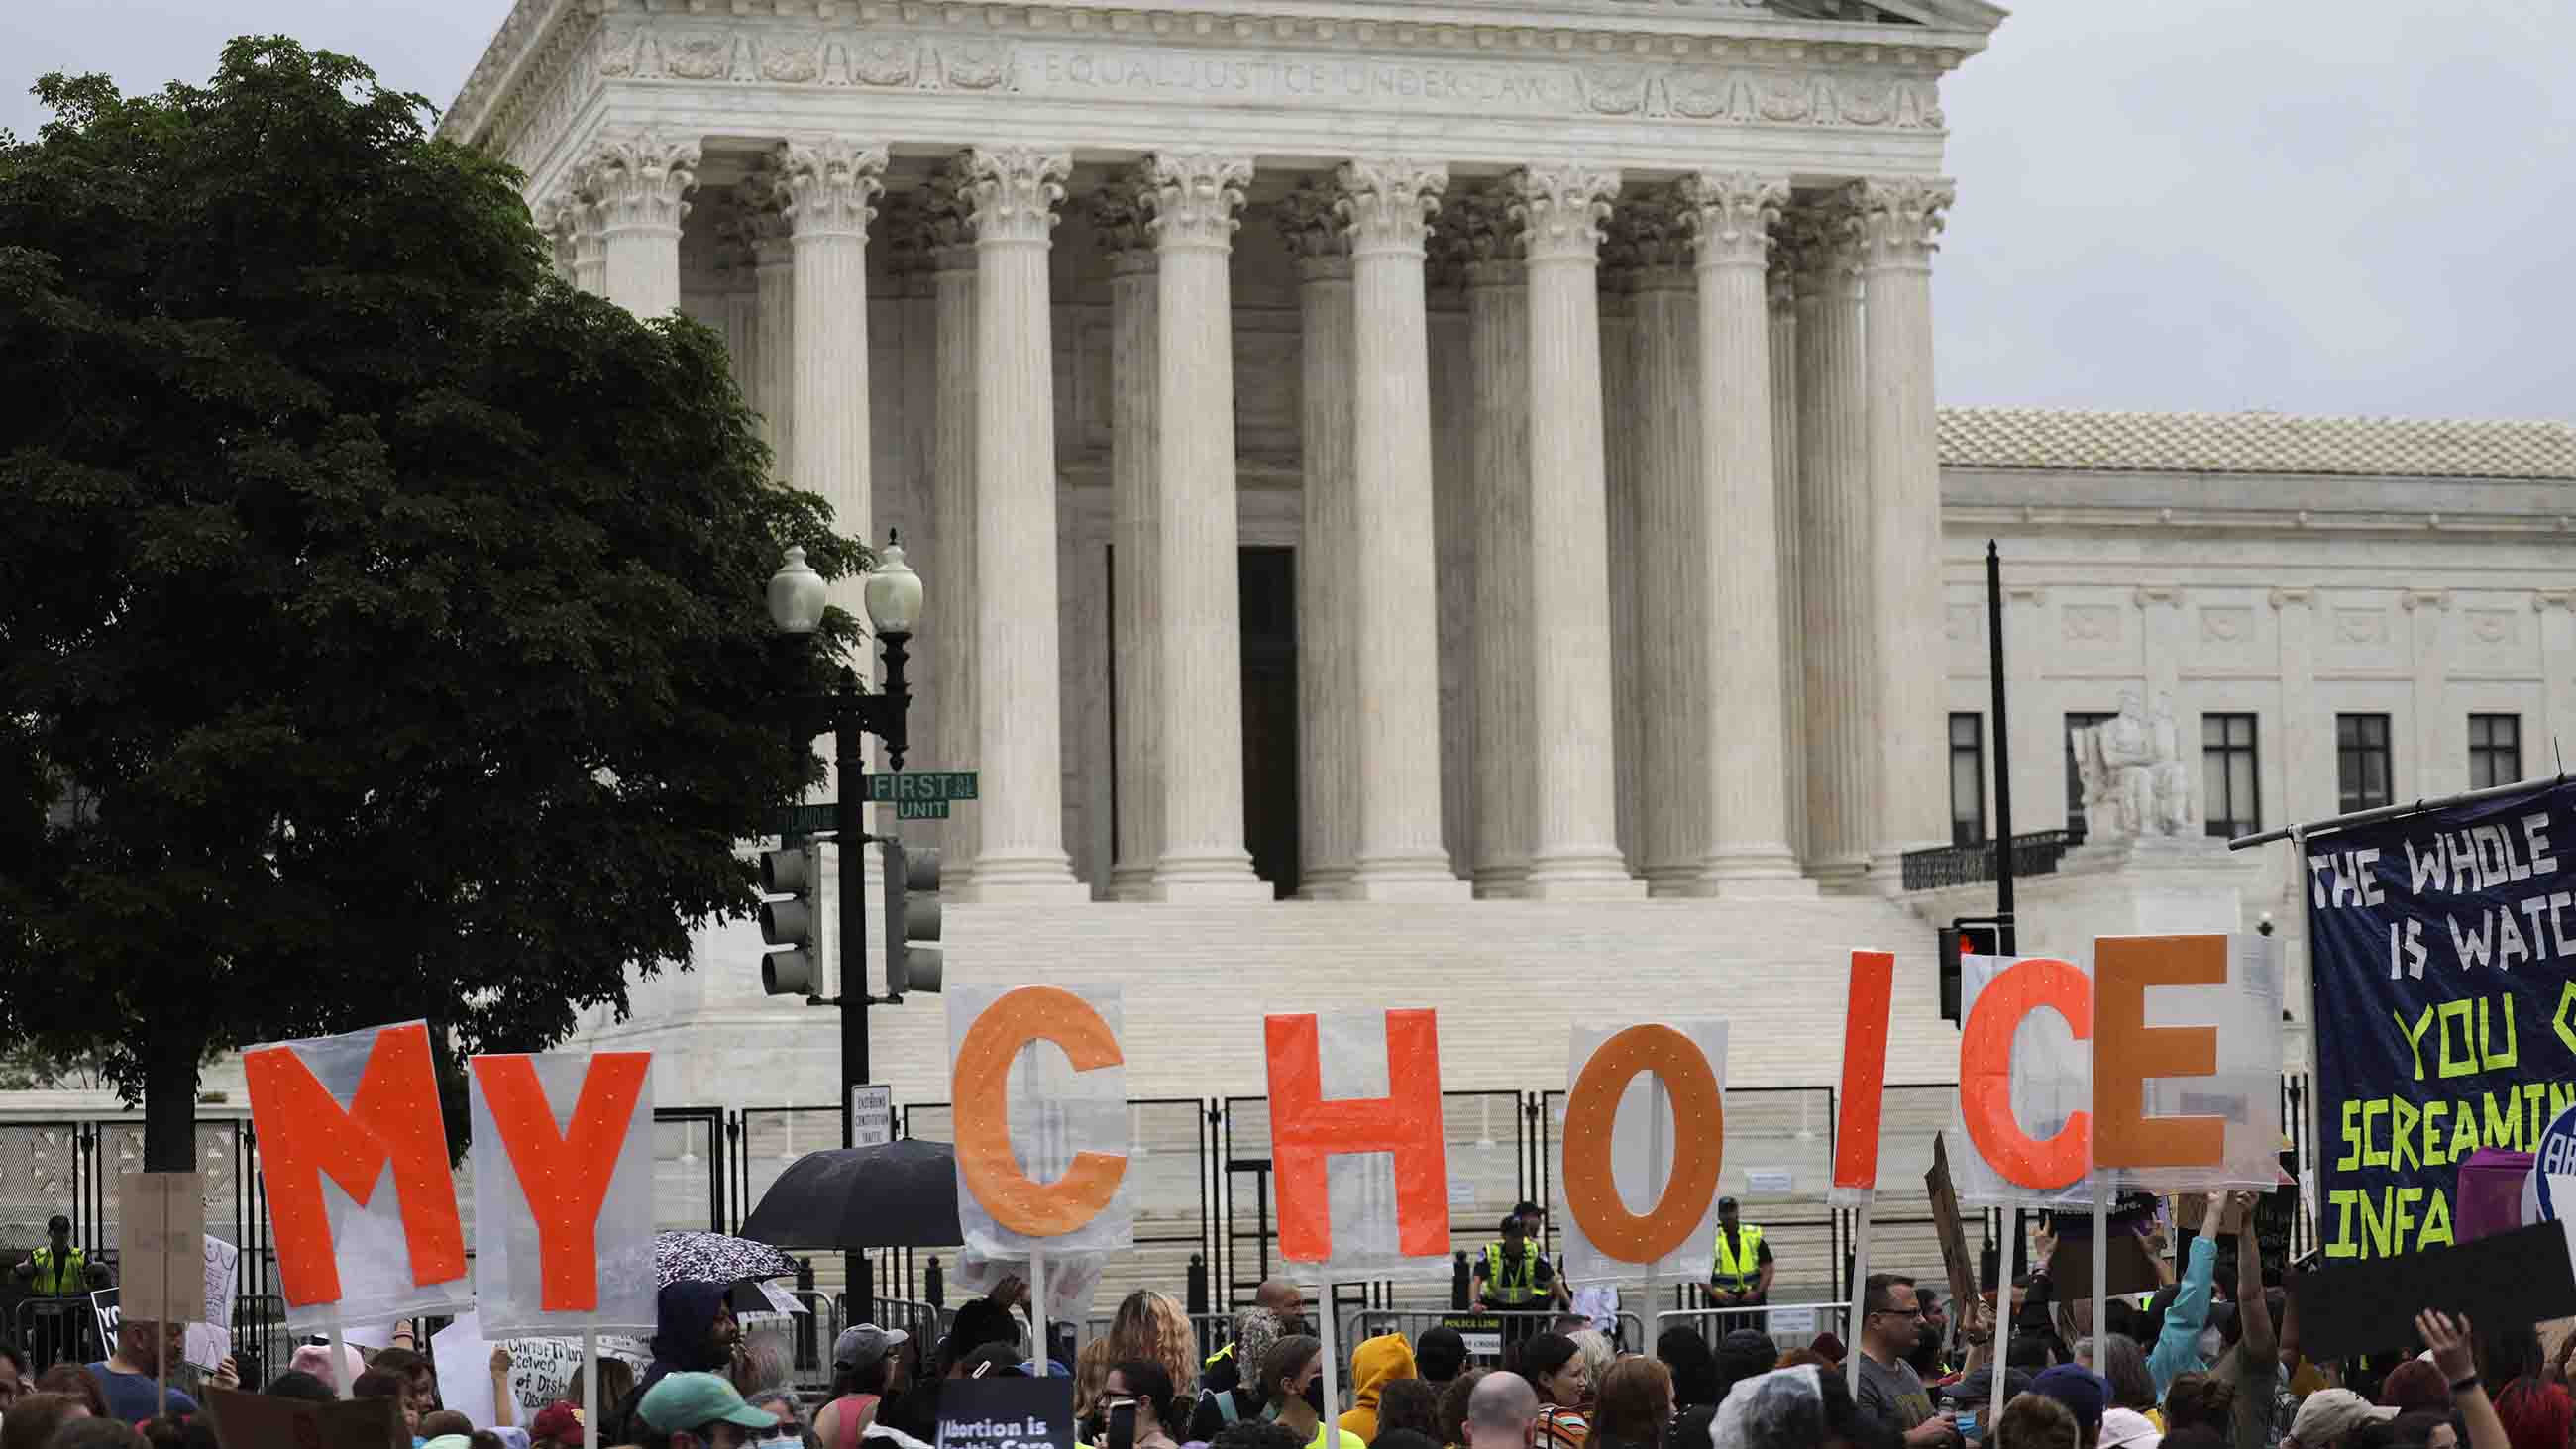 Abortion rights activists participate in a "Bans Off Our Bodies" rally at the U.S. Supreme Court on May 14, 2022 in Washington, DC.